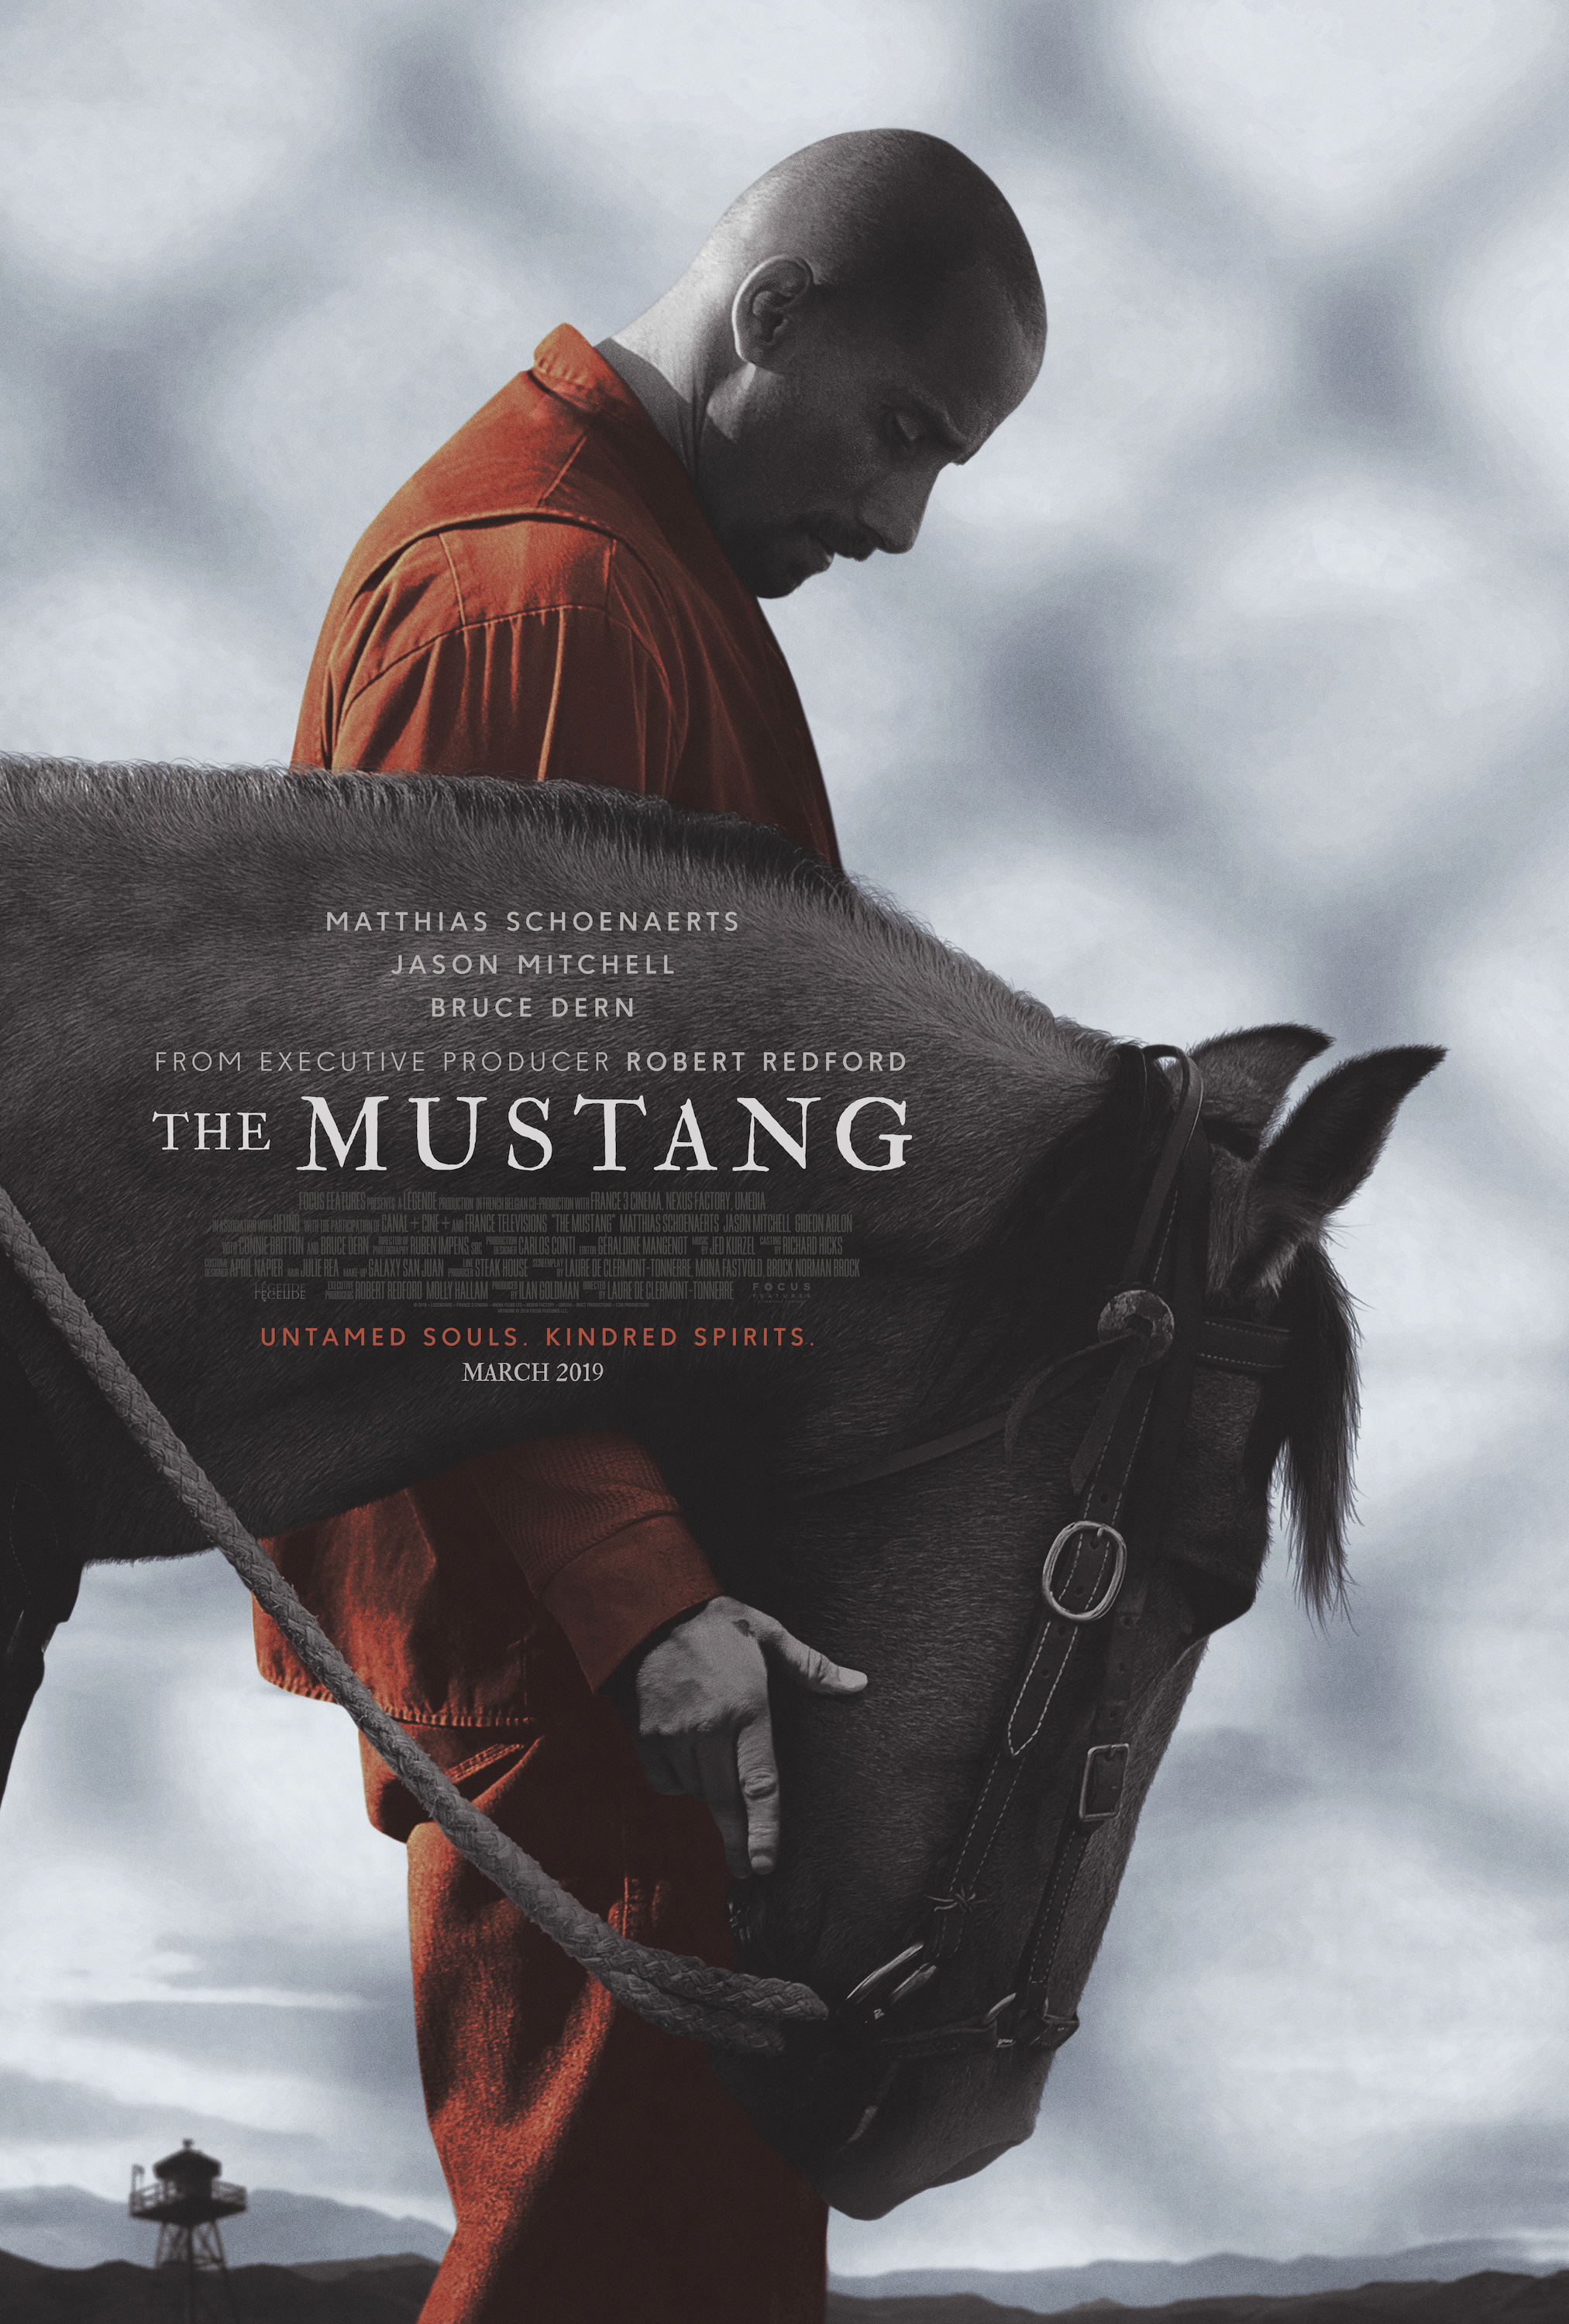 The Mustang – Despite Its Flaws, a Solid Character Study